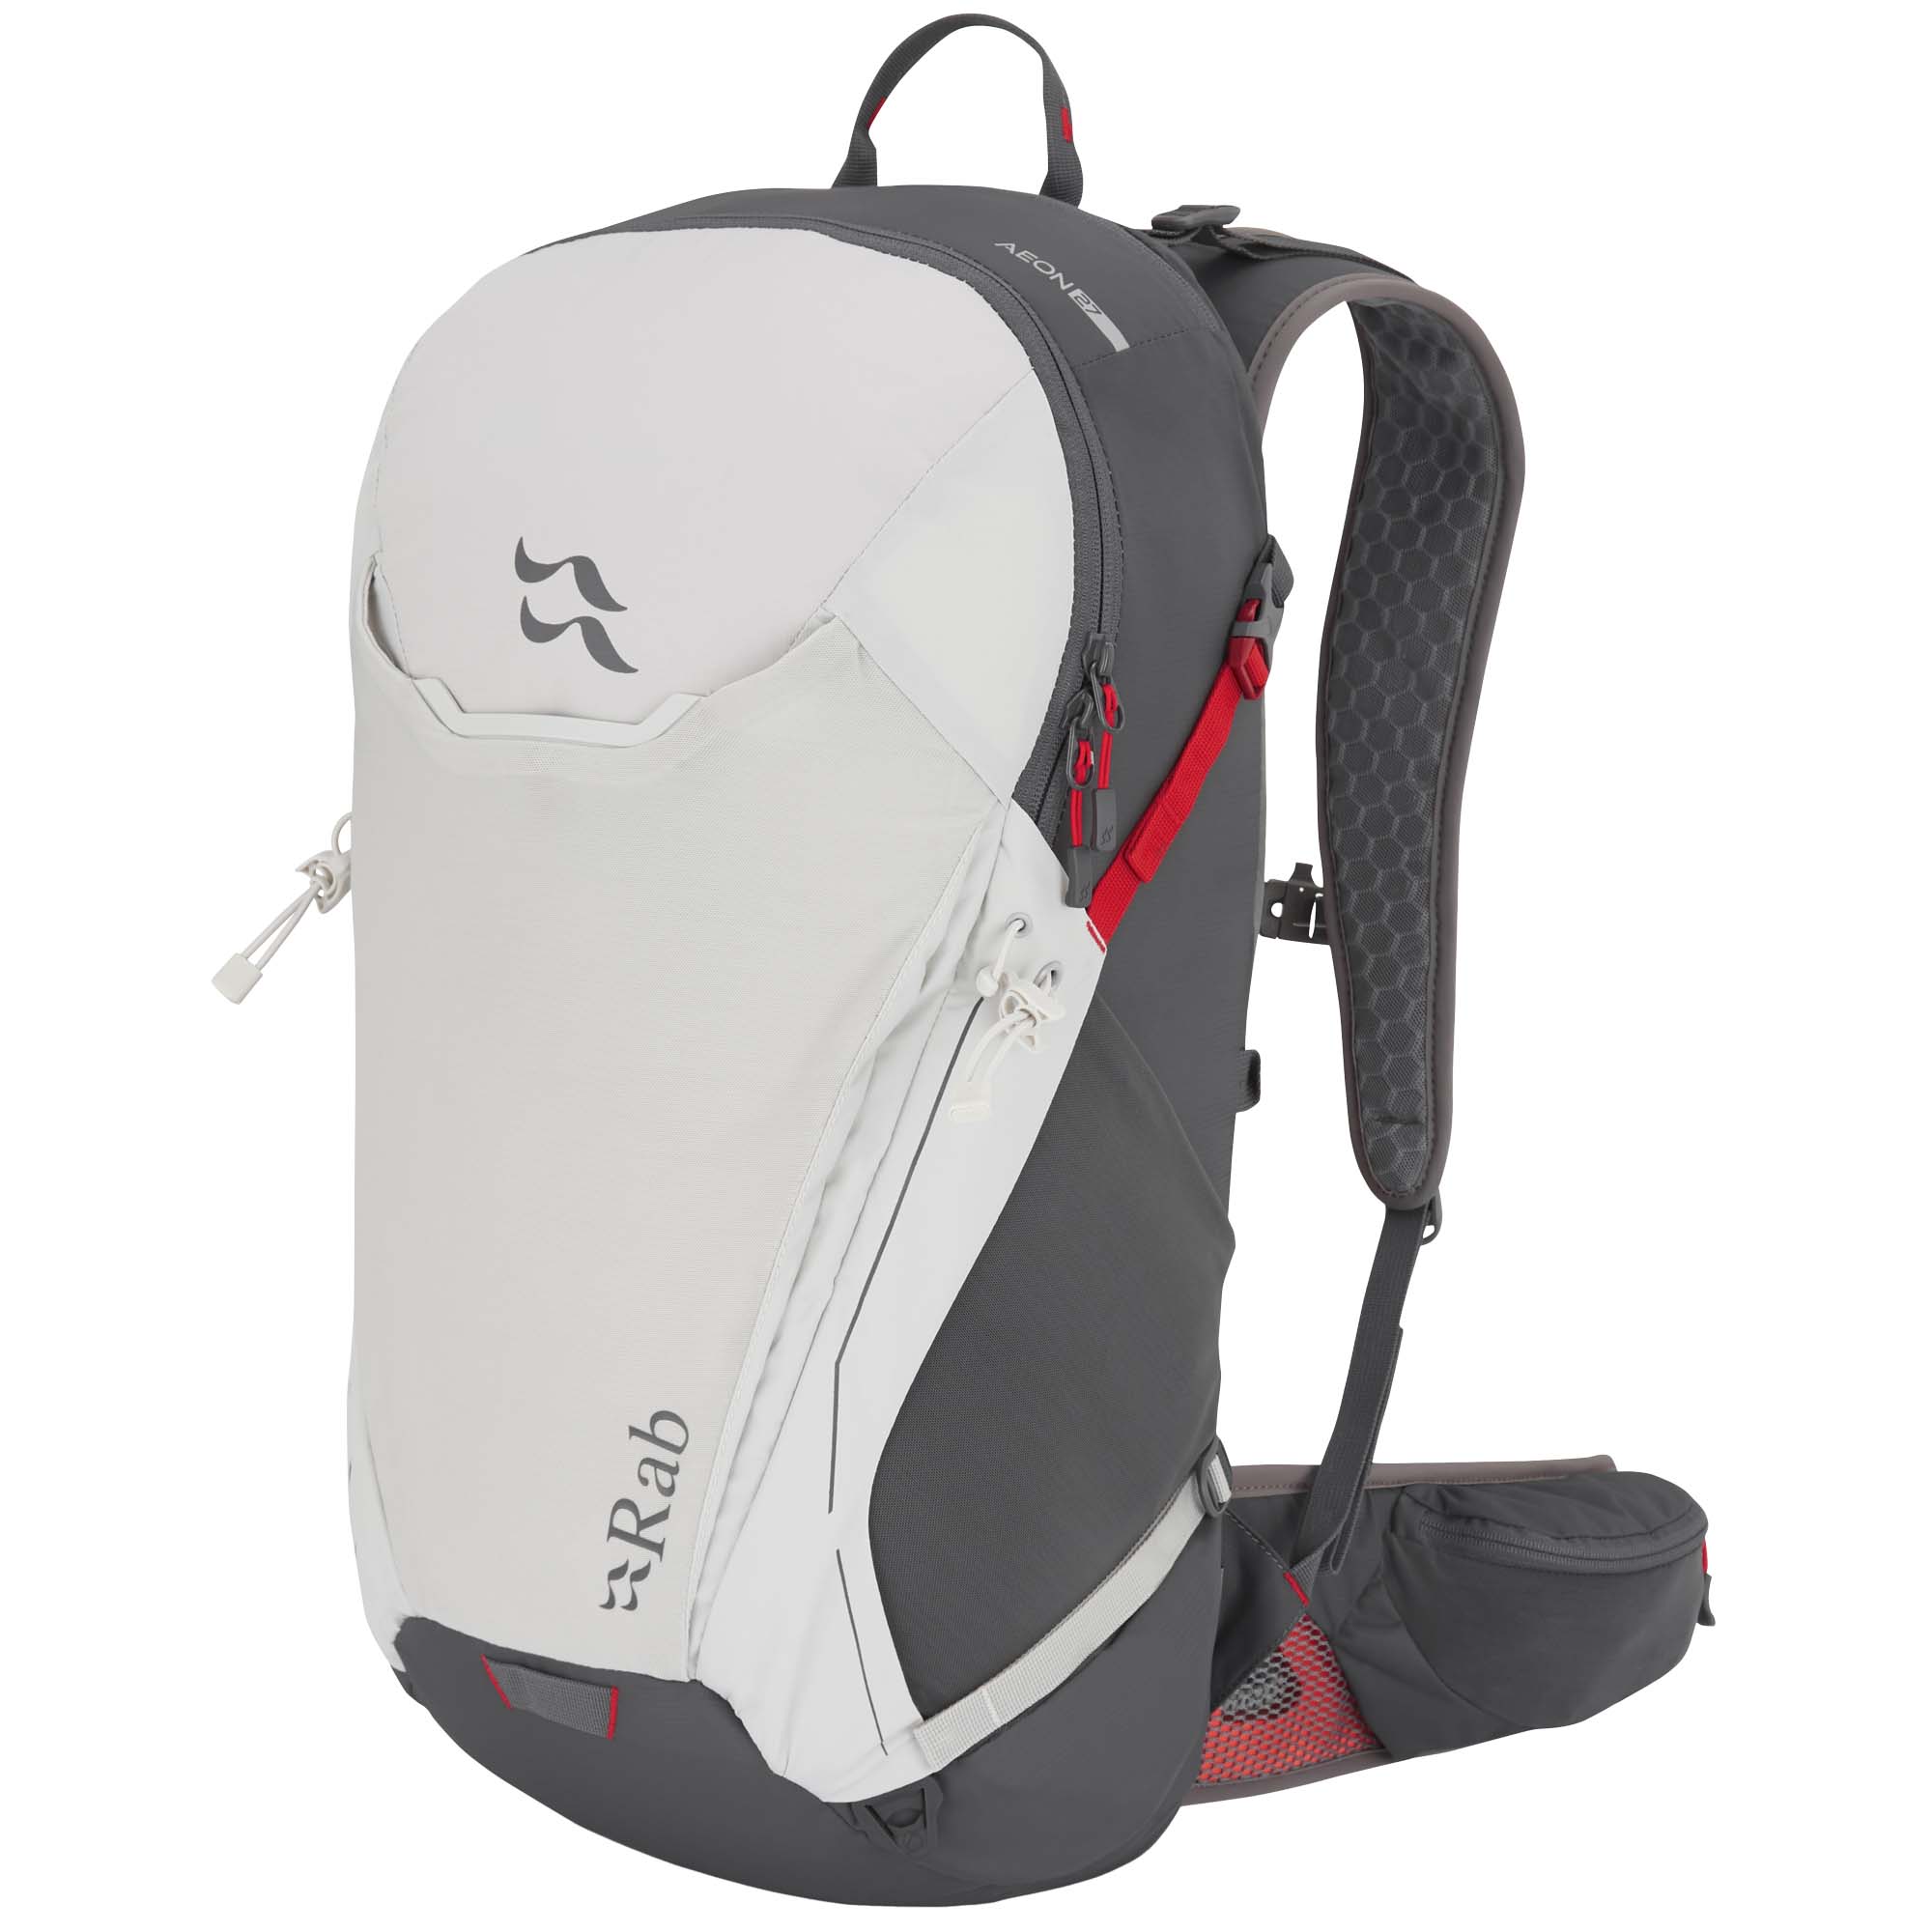 Rab Aeon 27 Technical Daypack/Backpack